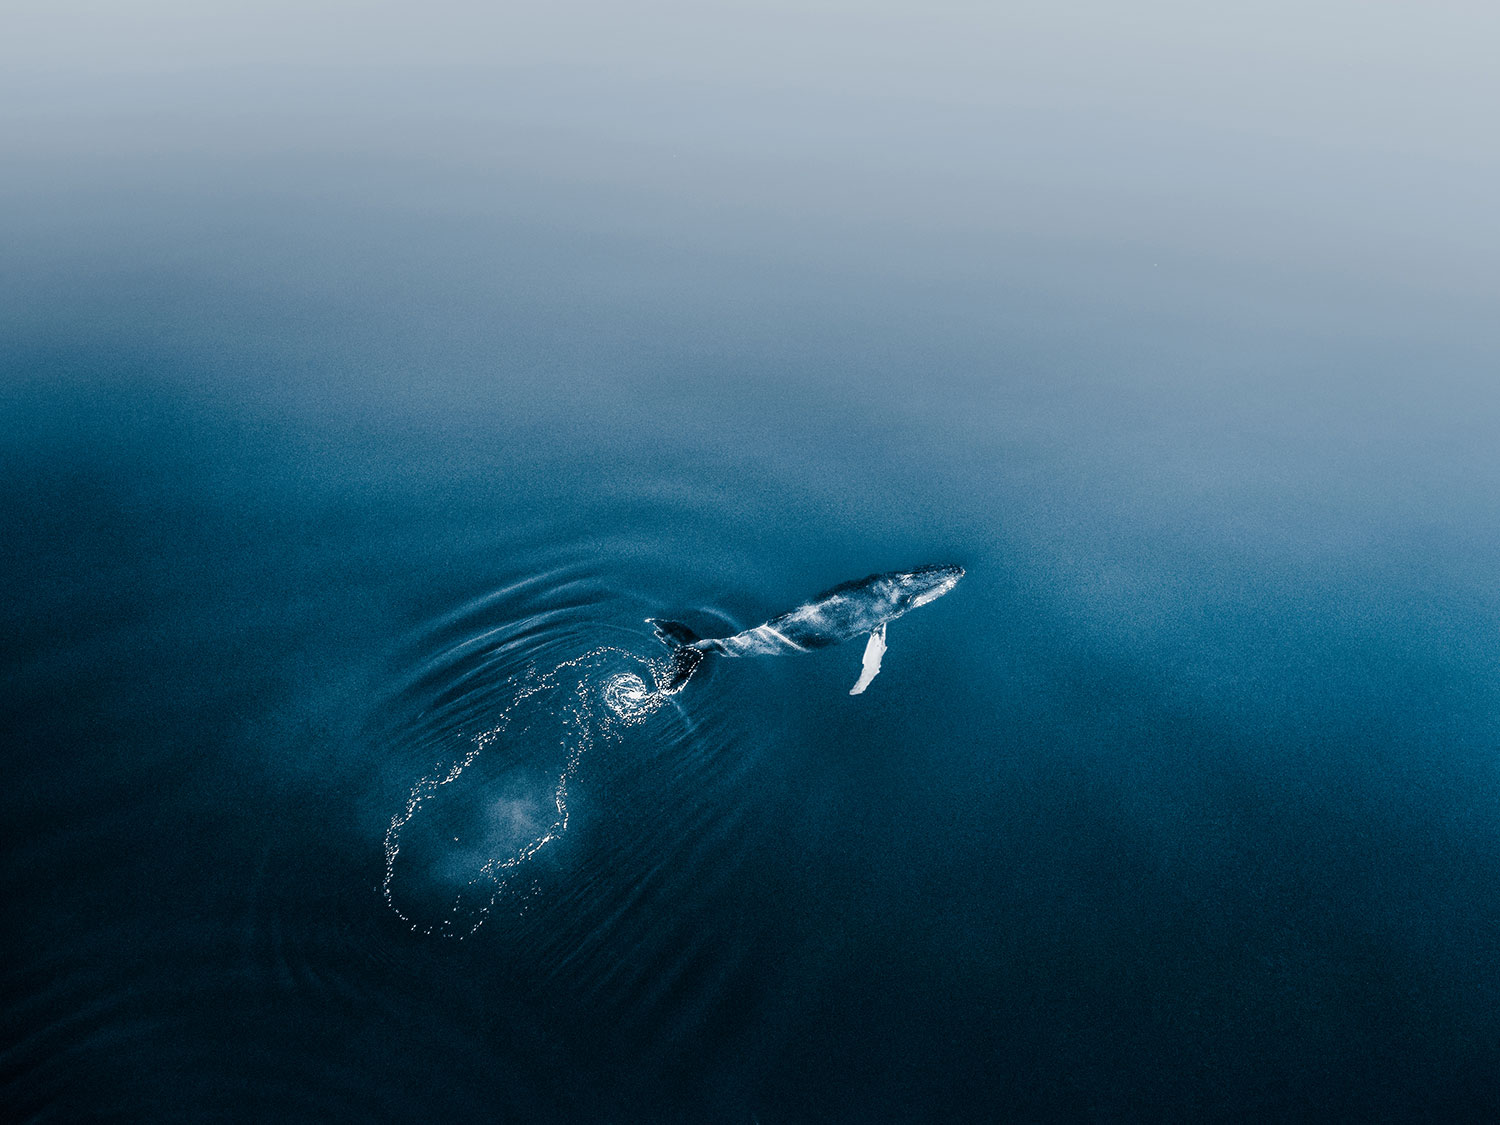 Aerial photo of a dark turquoise blue whale coming up for air just above the surface of a body of water that fades from the same dark turquoise colors of the whale at the bottom of the photo to a light gray/blue at the top of the photo.